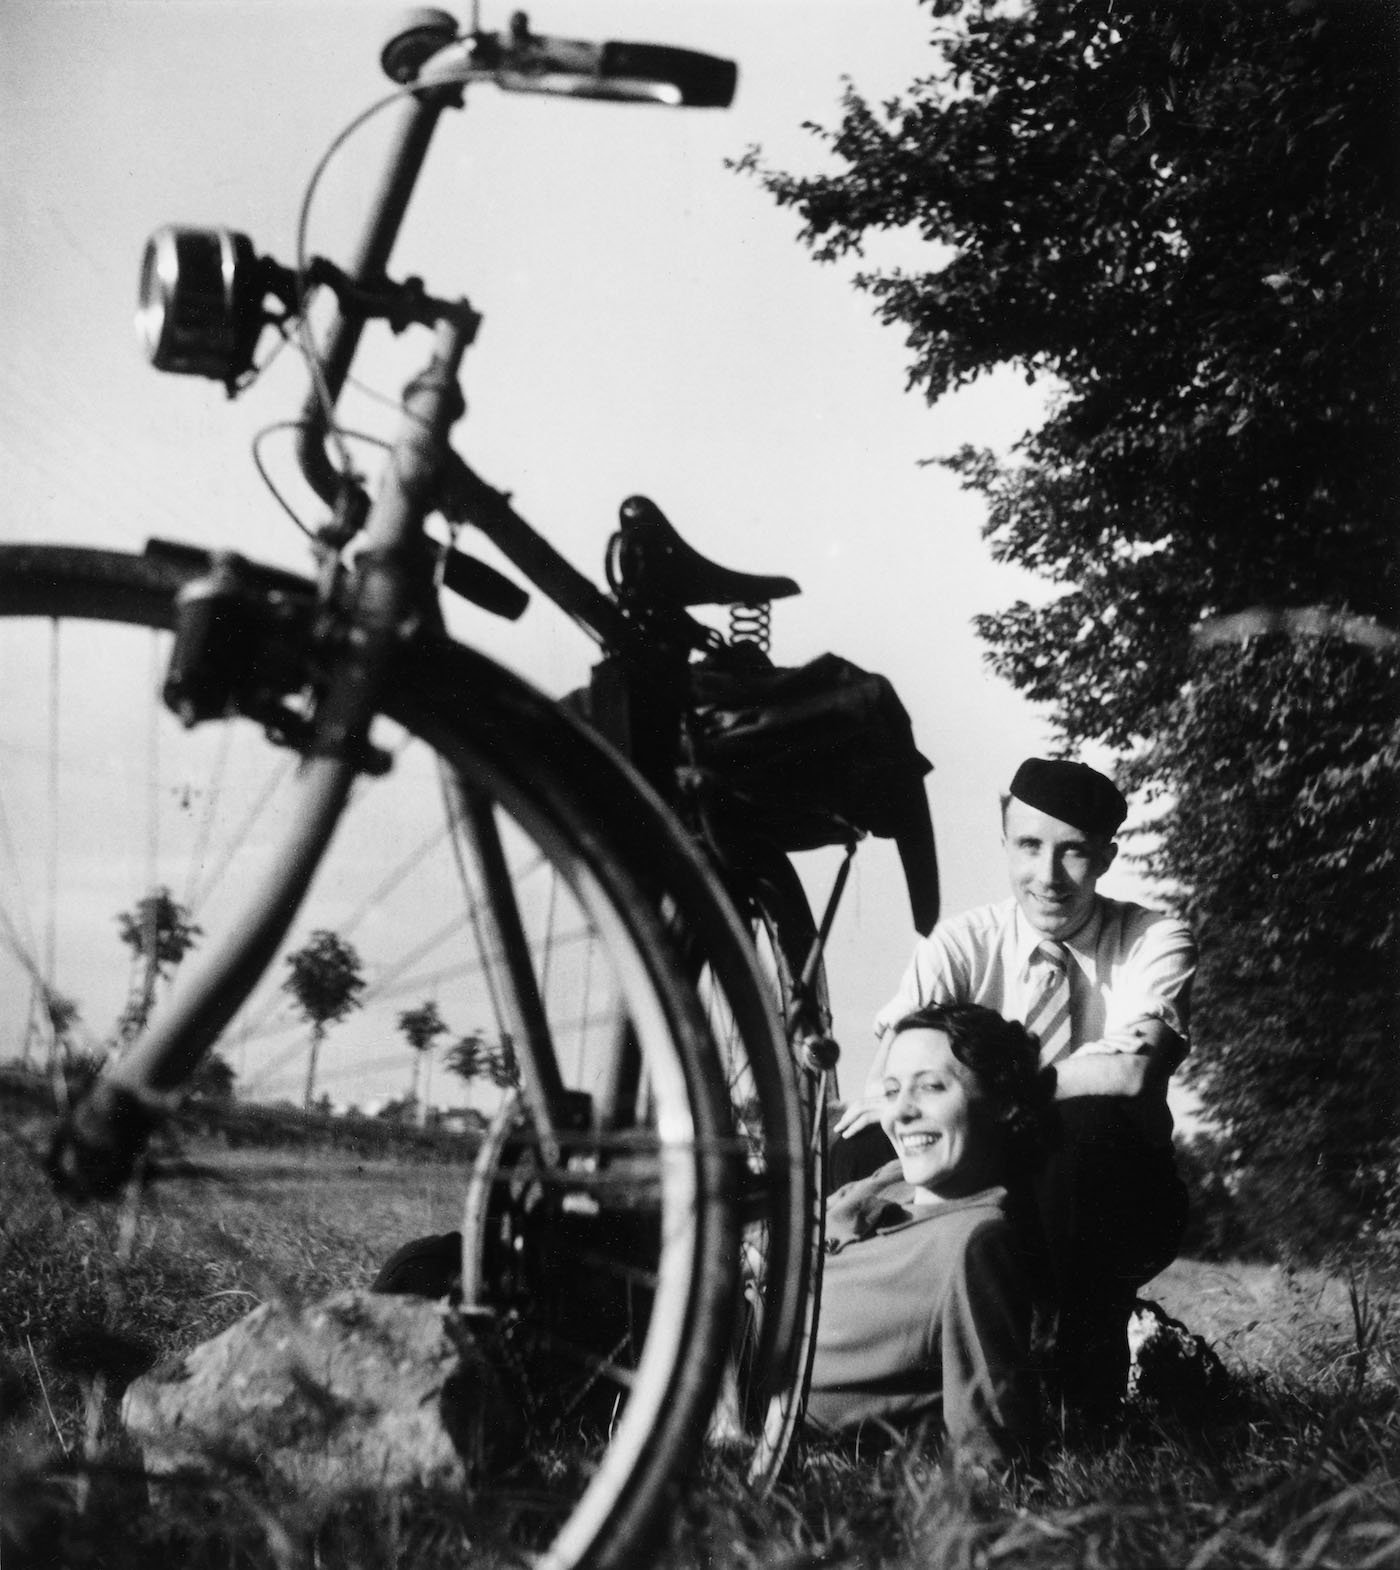 Willy Ronis, Cyclotourisme